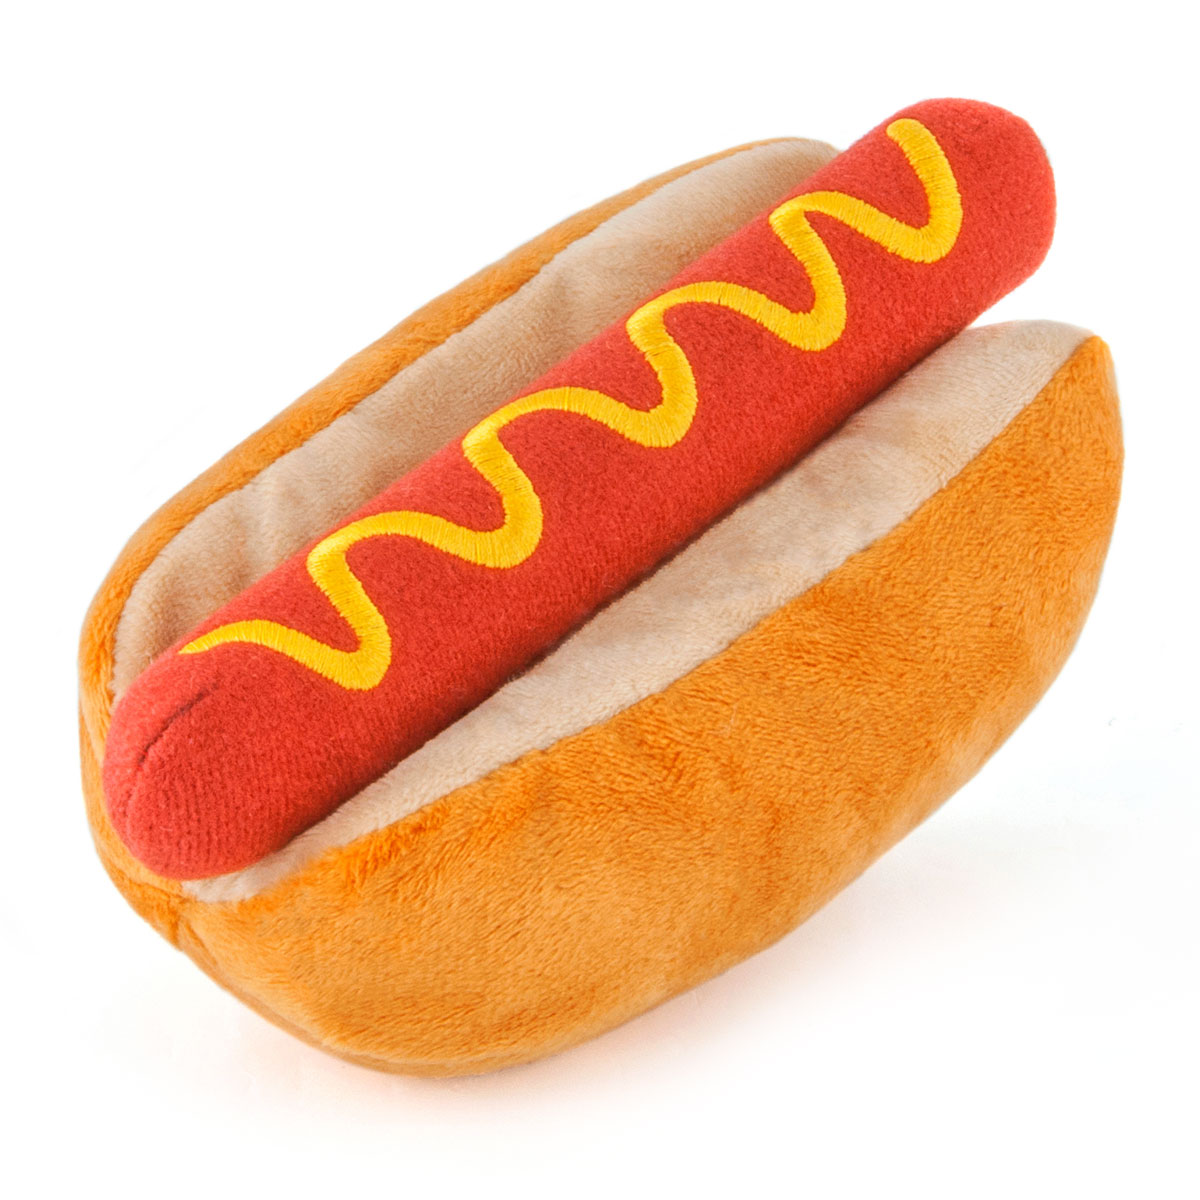 https://halaspaws.com/wp-content/uploads/2021/05/PLAY-American-Classic-Food-Toy-Hot-Dog.jpg